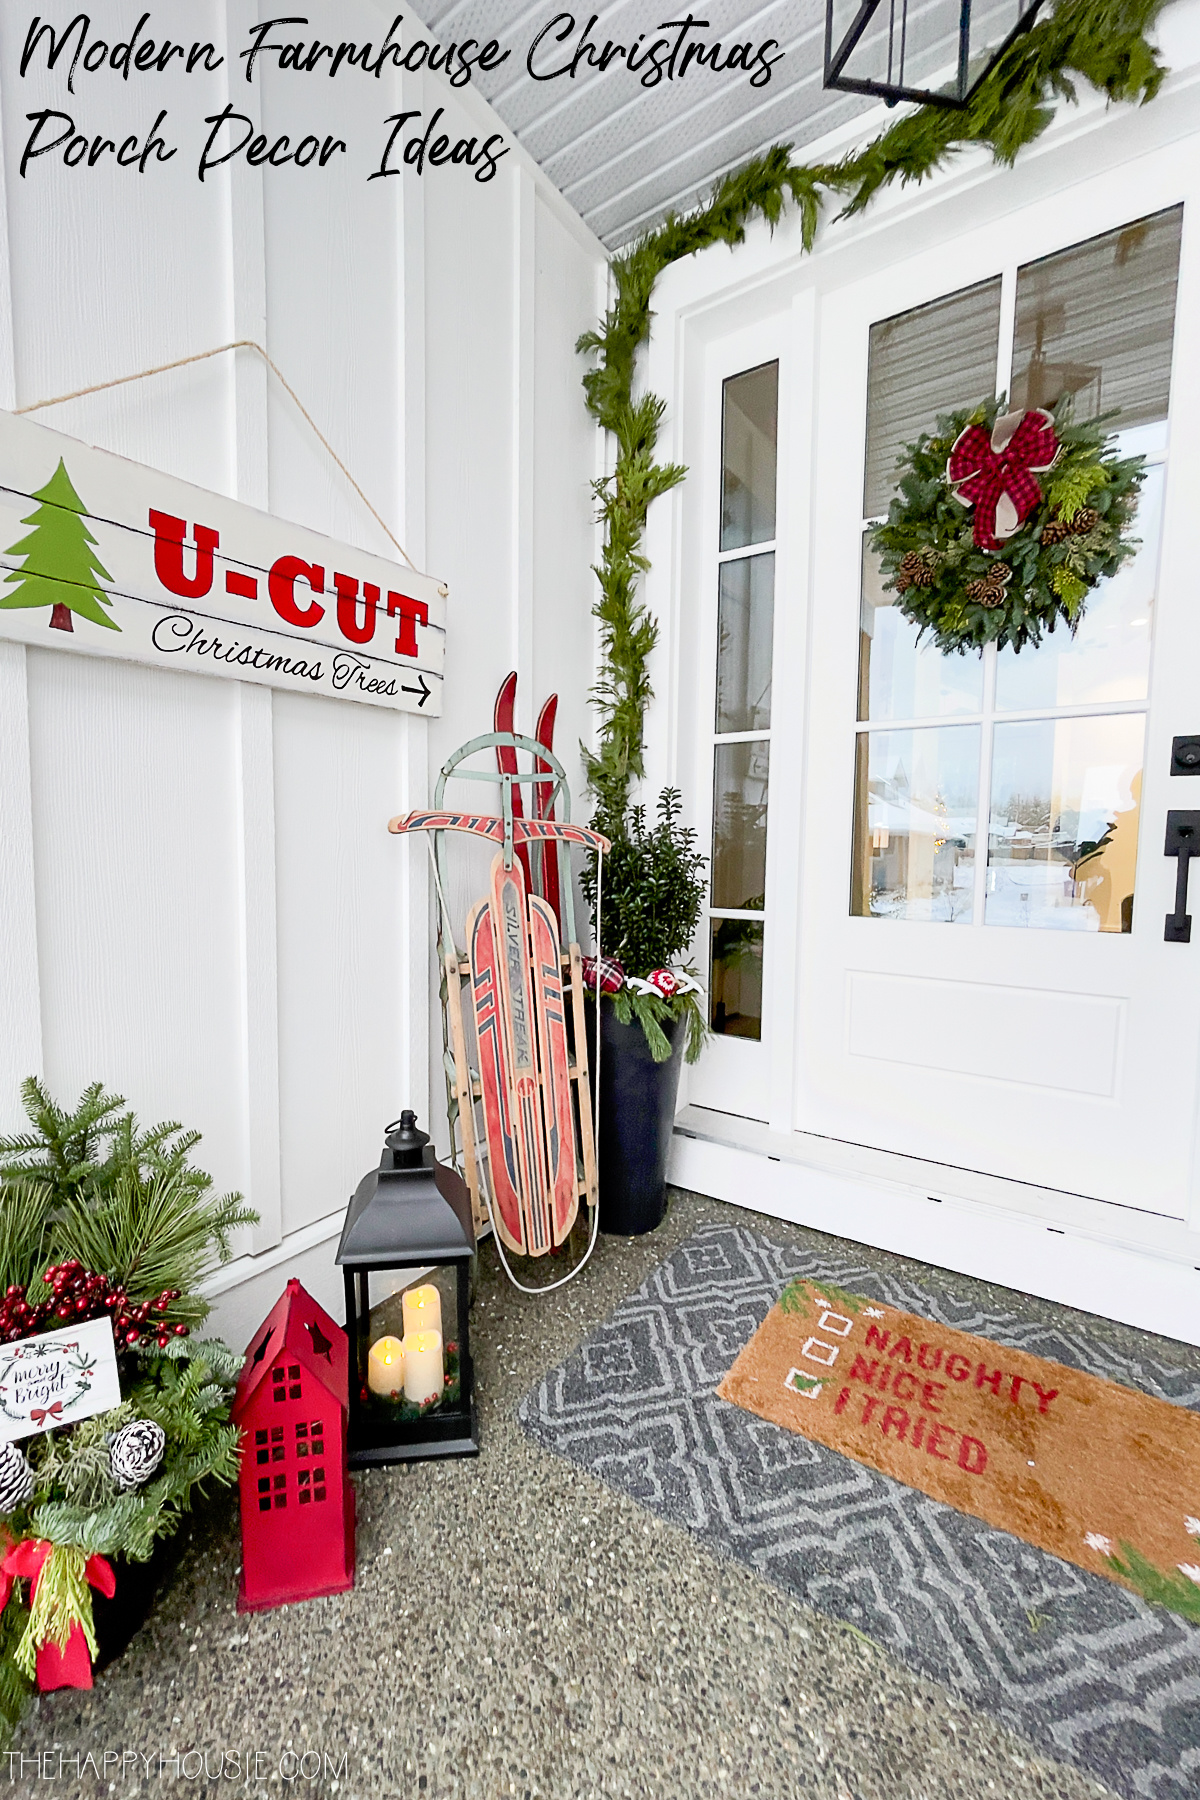 https://www.thehappyhousie.com/wp-content/uploads/2021/12/Modern-Farmhouse-Christmas-Porch-Decor-ideas-with-red-black-and-white-10.jpg